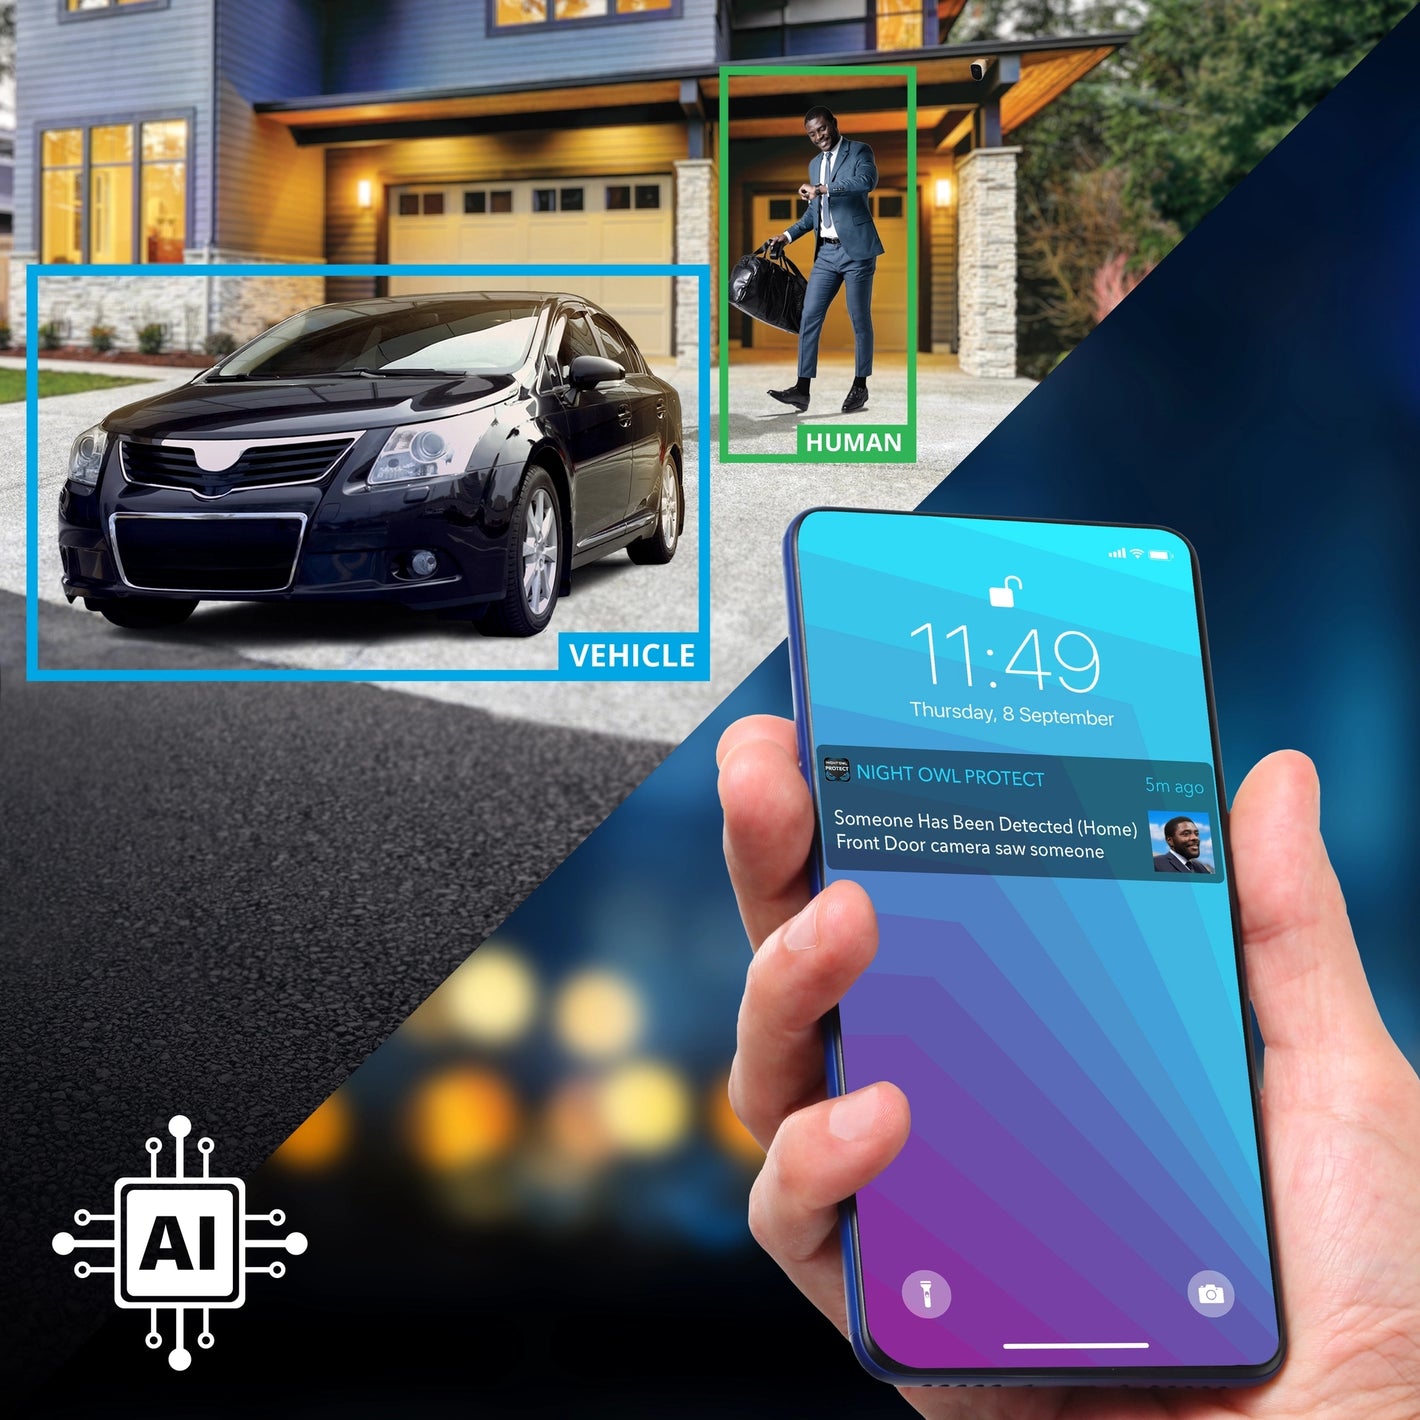 App using camera to tell the difference between car and person outside